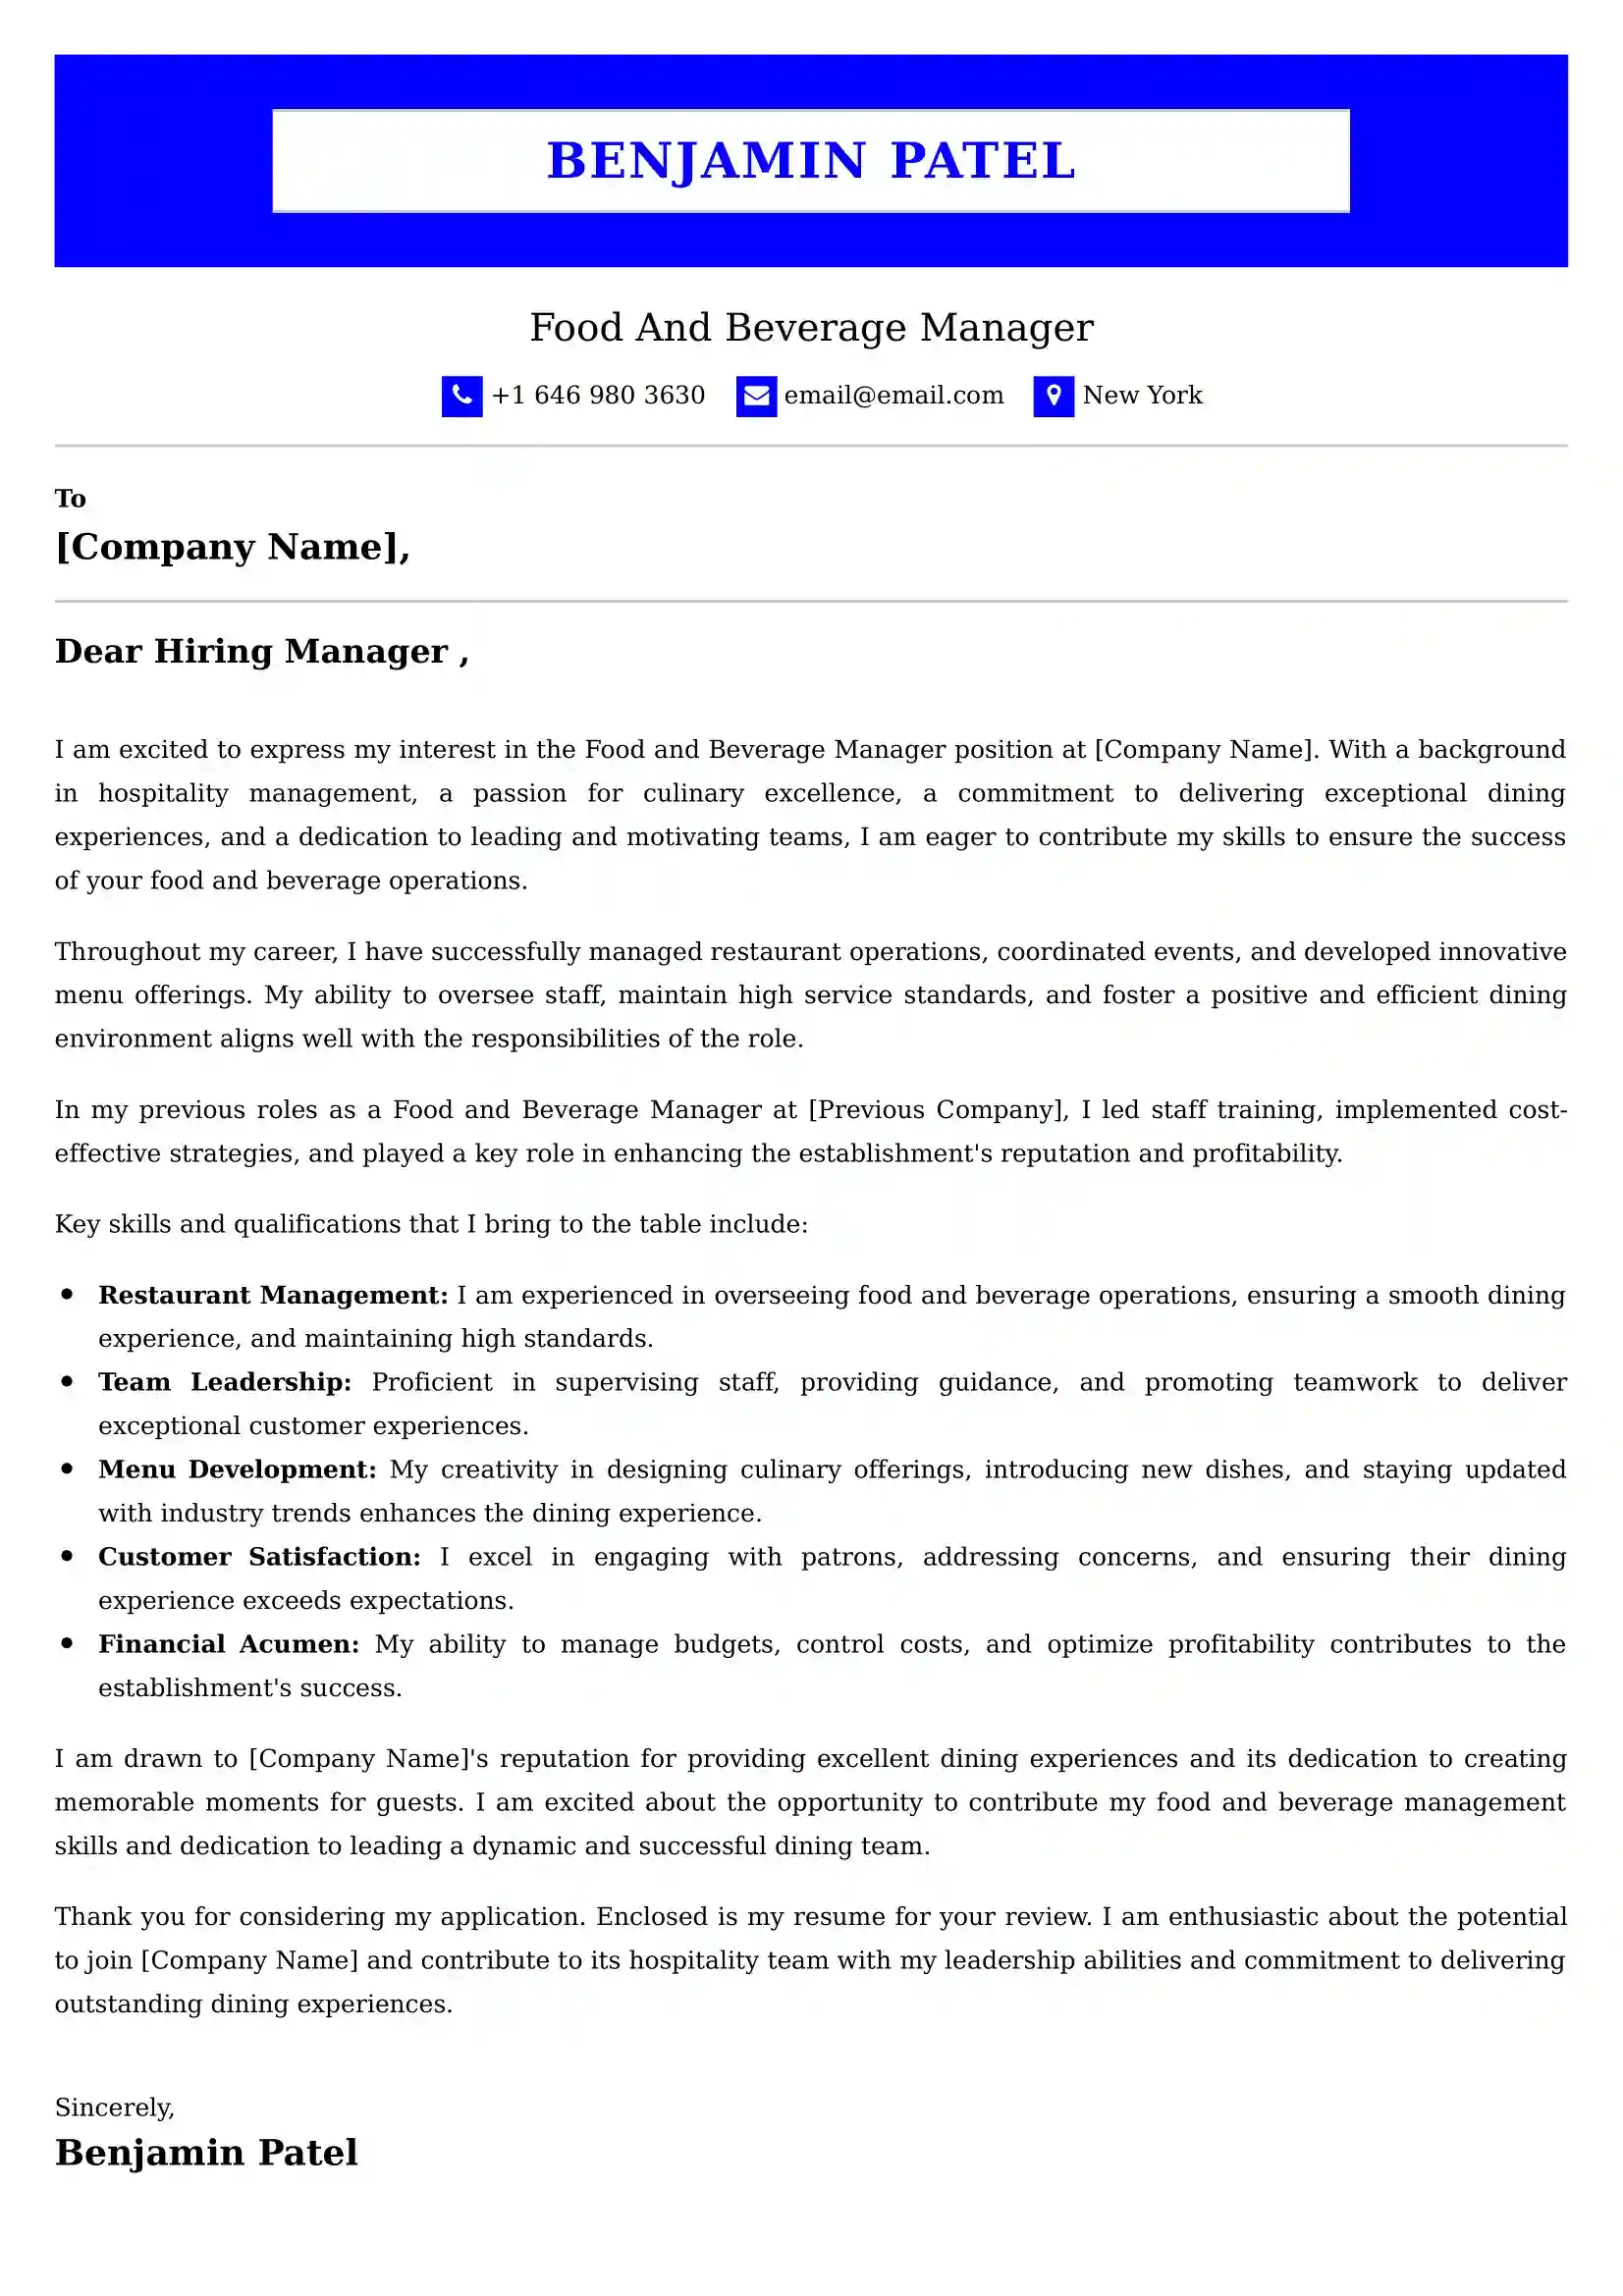 Food And Beverage Server Cover Letter Examples - US Format and Tips